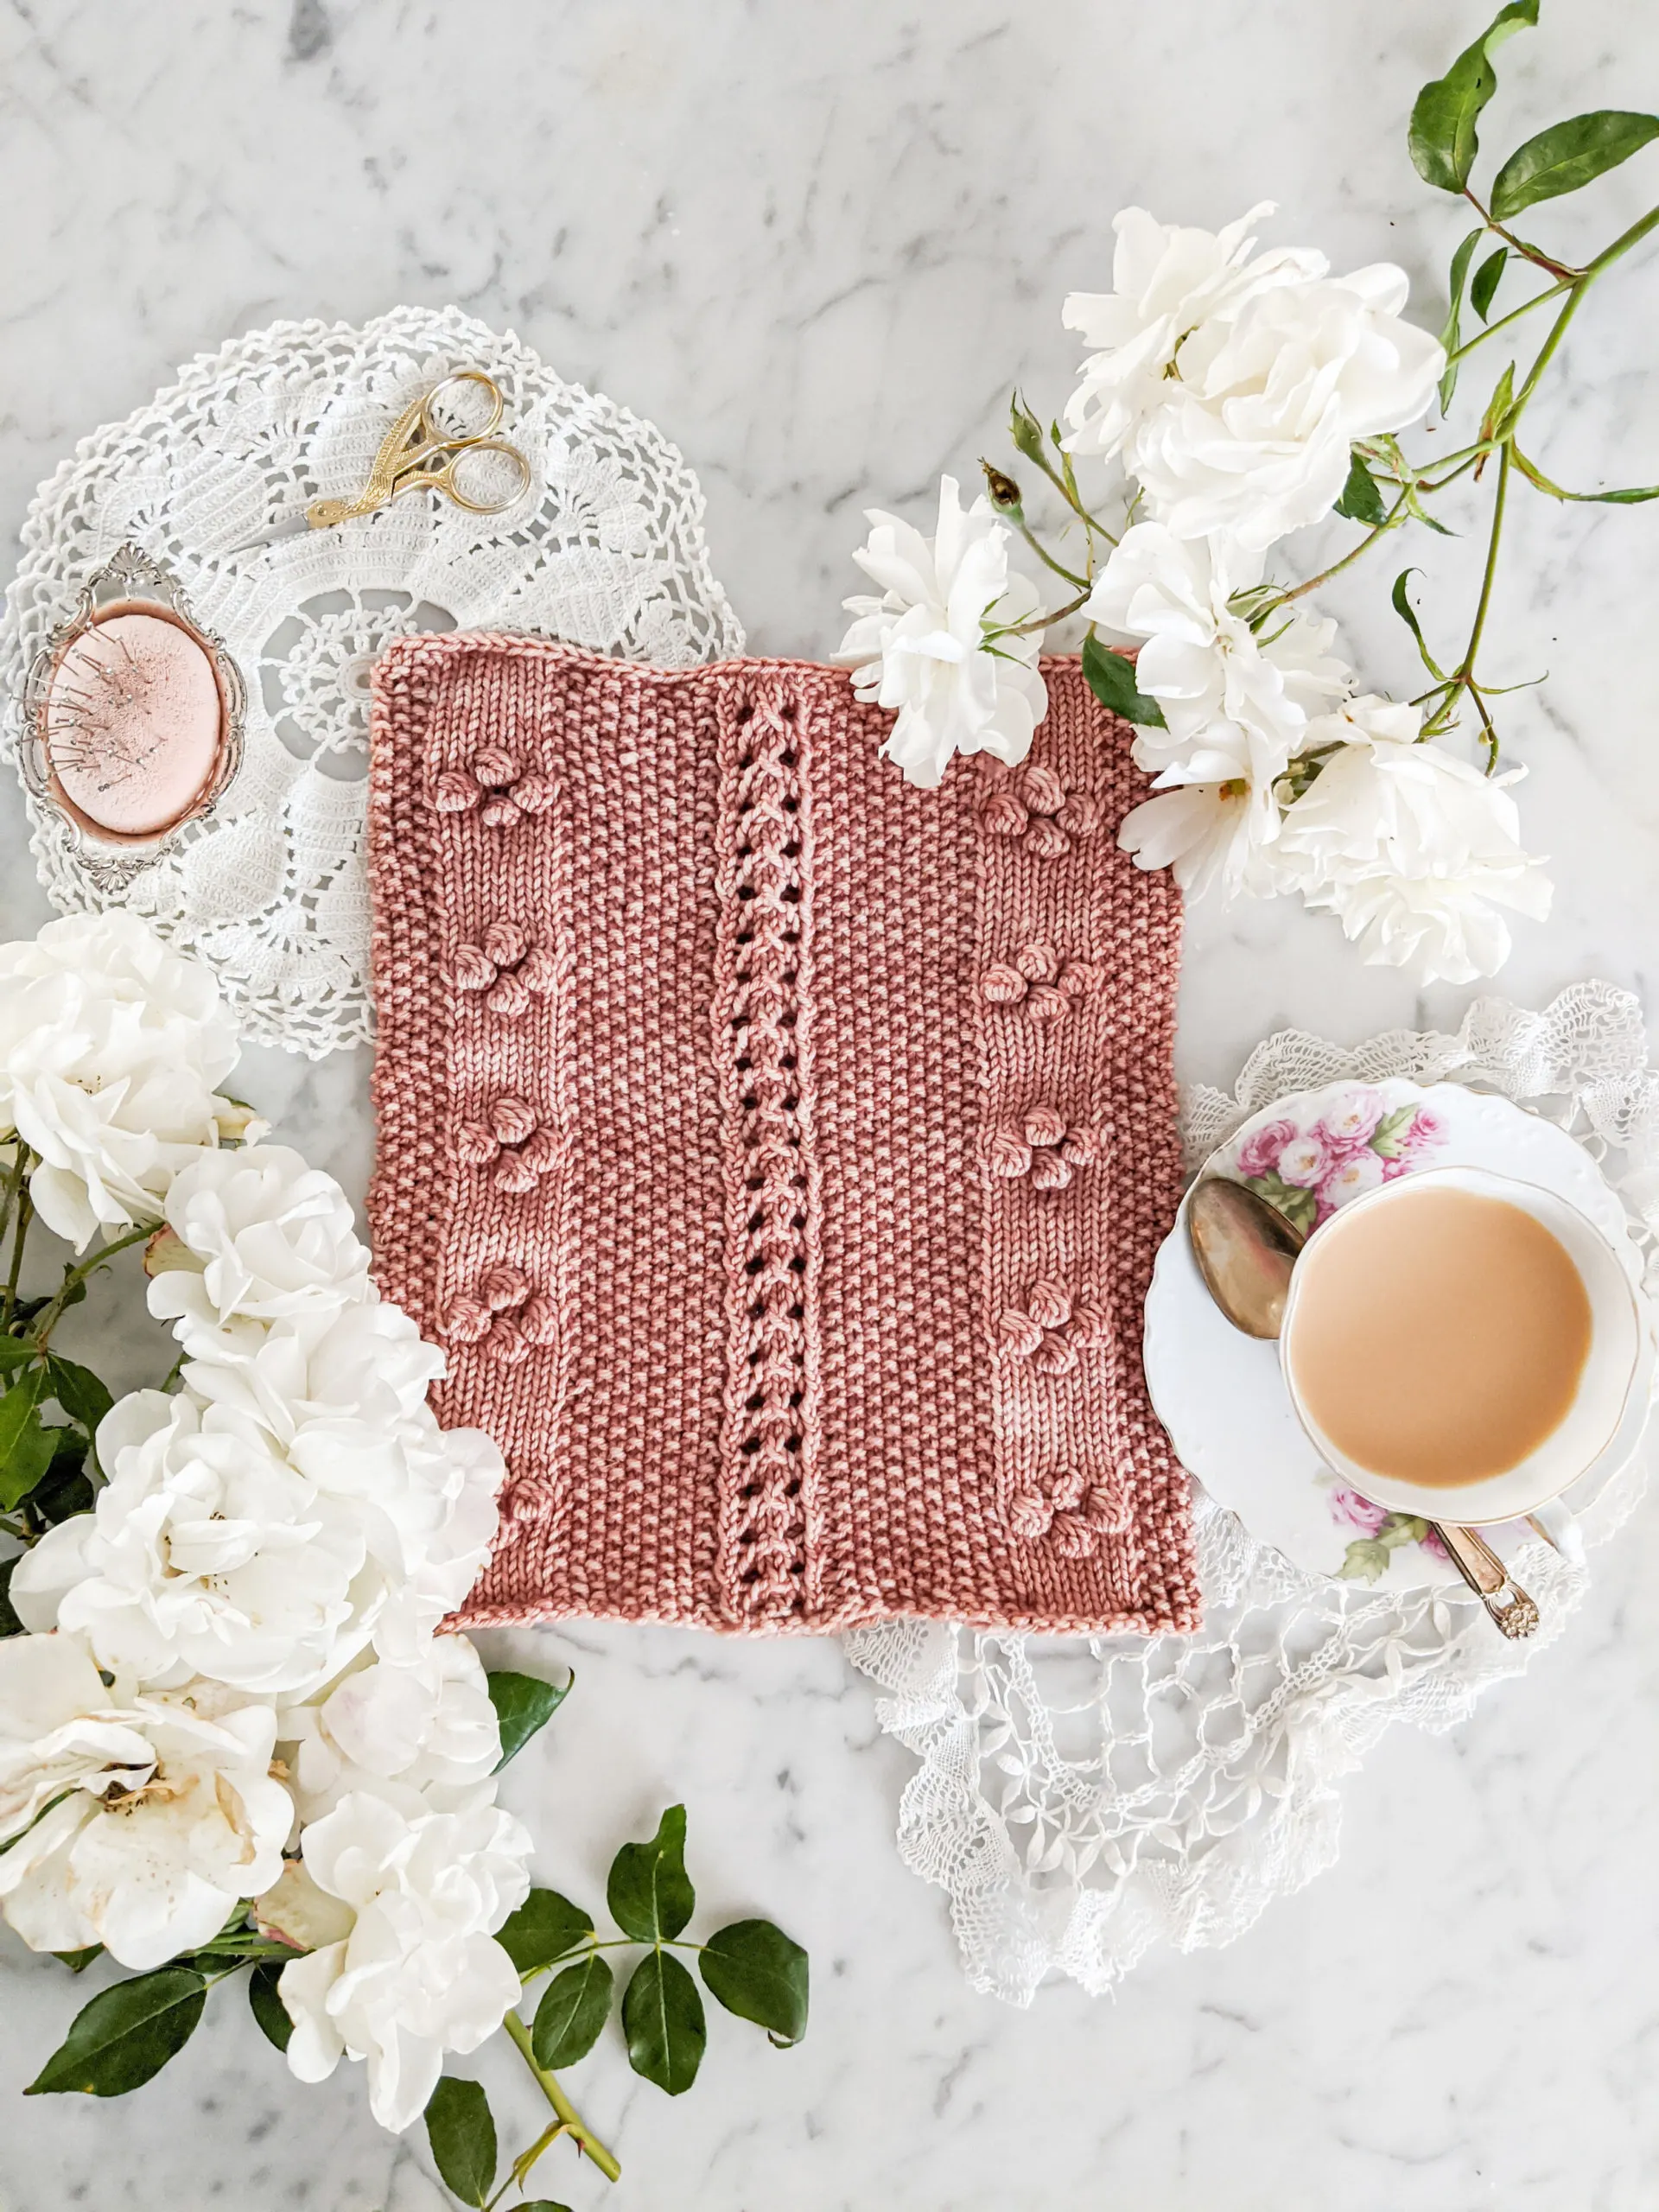 A pink cowl with columns of eyelets and bobbles is laid flat on a white marble countertop and surrounded by white roses, a teacup full of milky tea, and antique doilies.